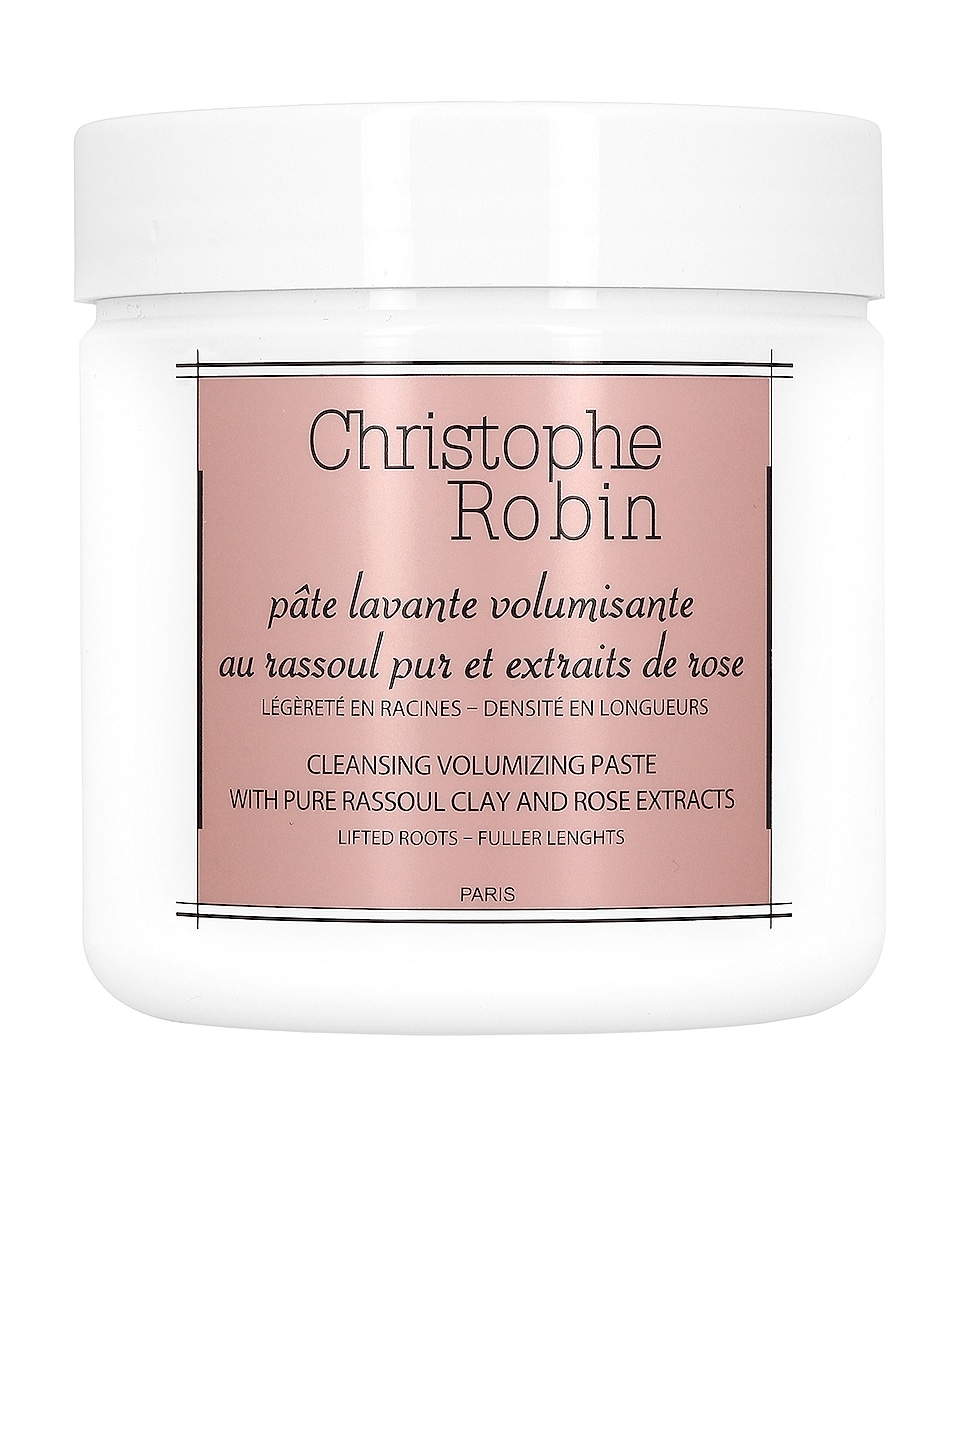 CHRISTOPHE ROBIN CLEANSING VOLUMIZING PASTE WITH PURE RASSOUL CLAY AND ROSE EXTRACTS,CBIR-WU6